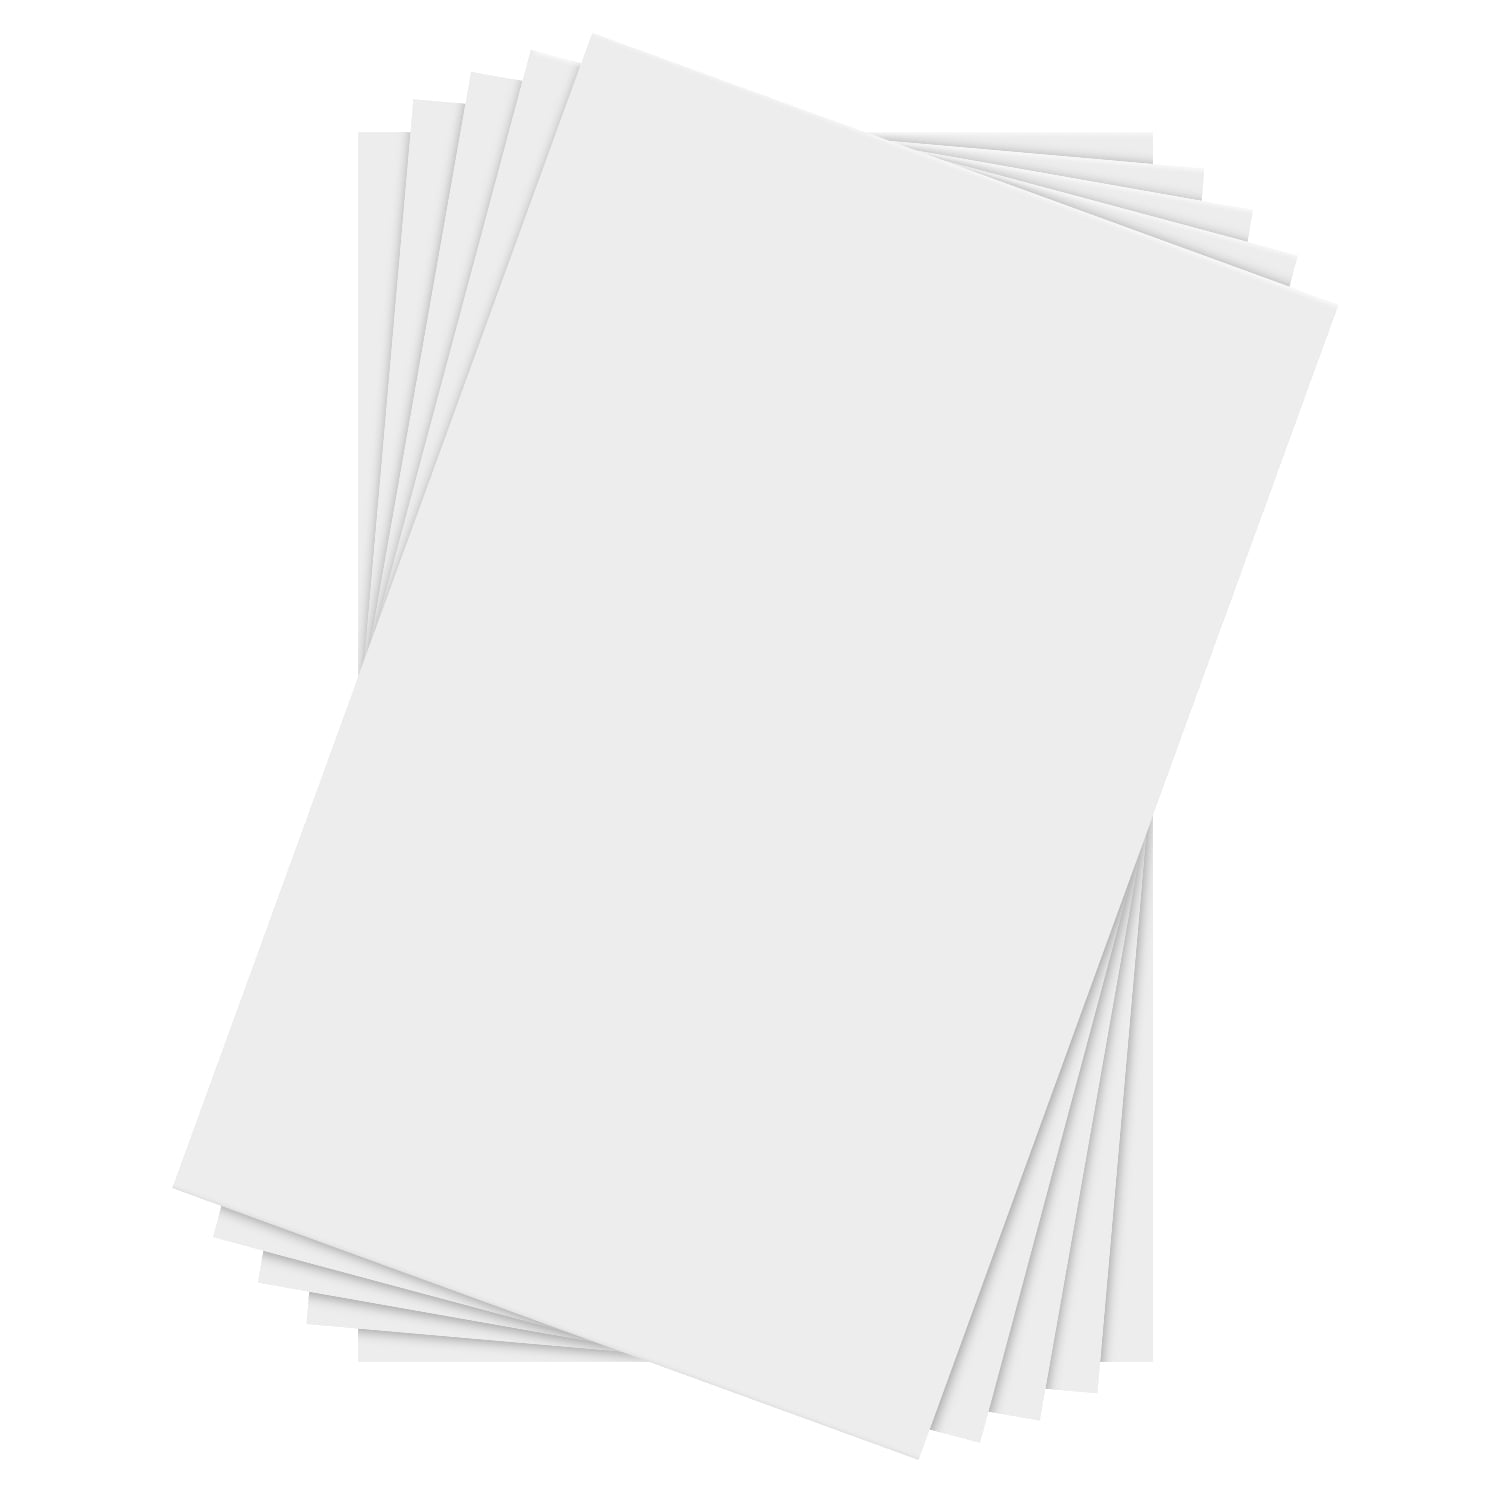 A4 White Card 30 x 150 GSM Sheets